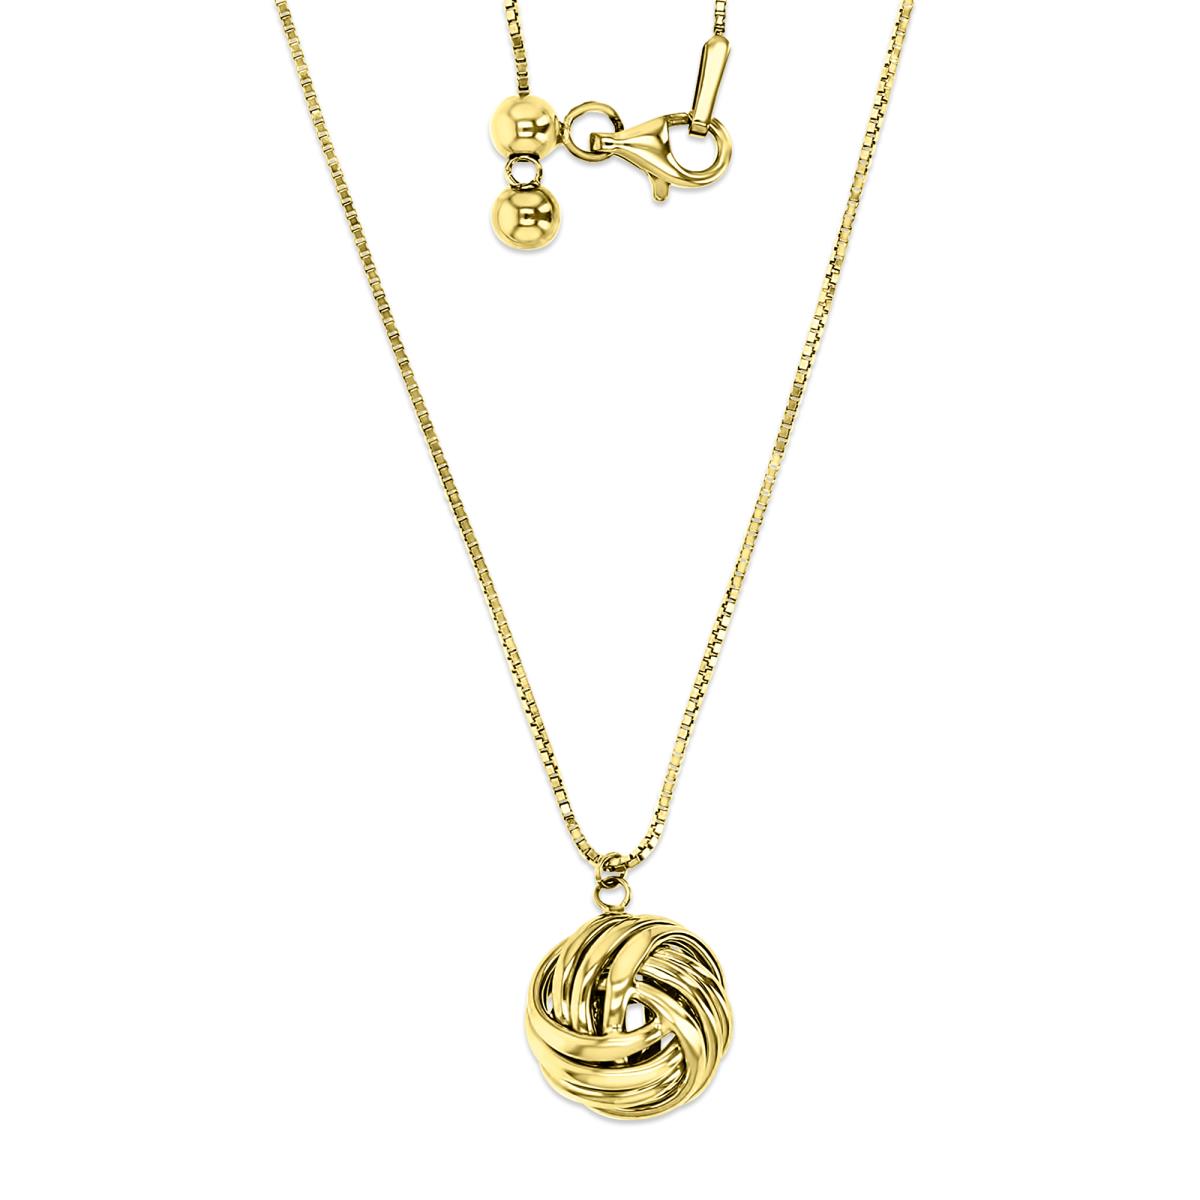 10K Yellow Gold 12mm Love Knot 17" Adjustable Necklace